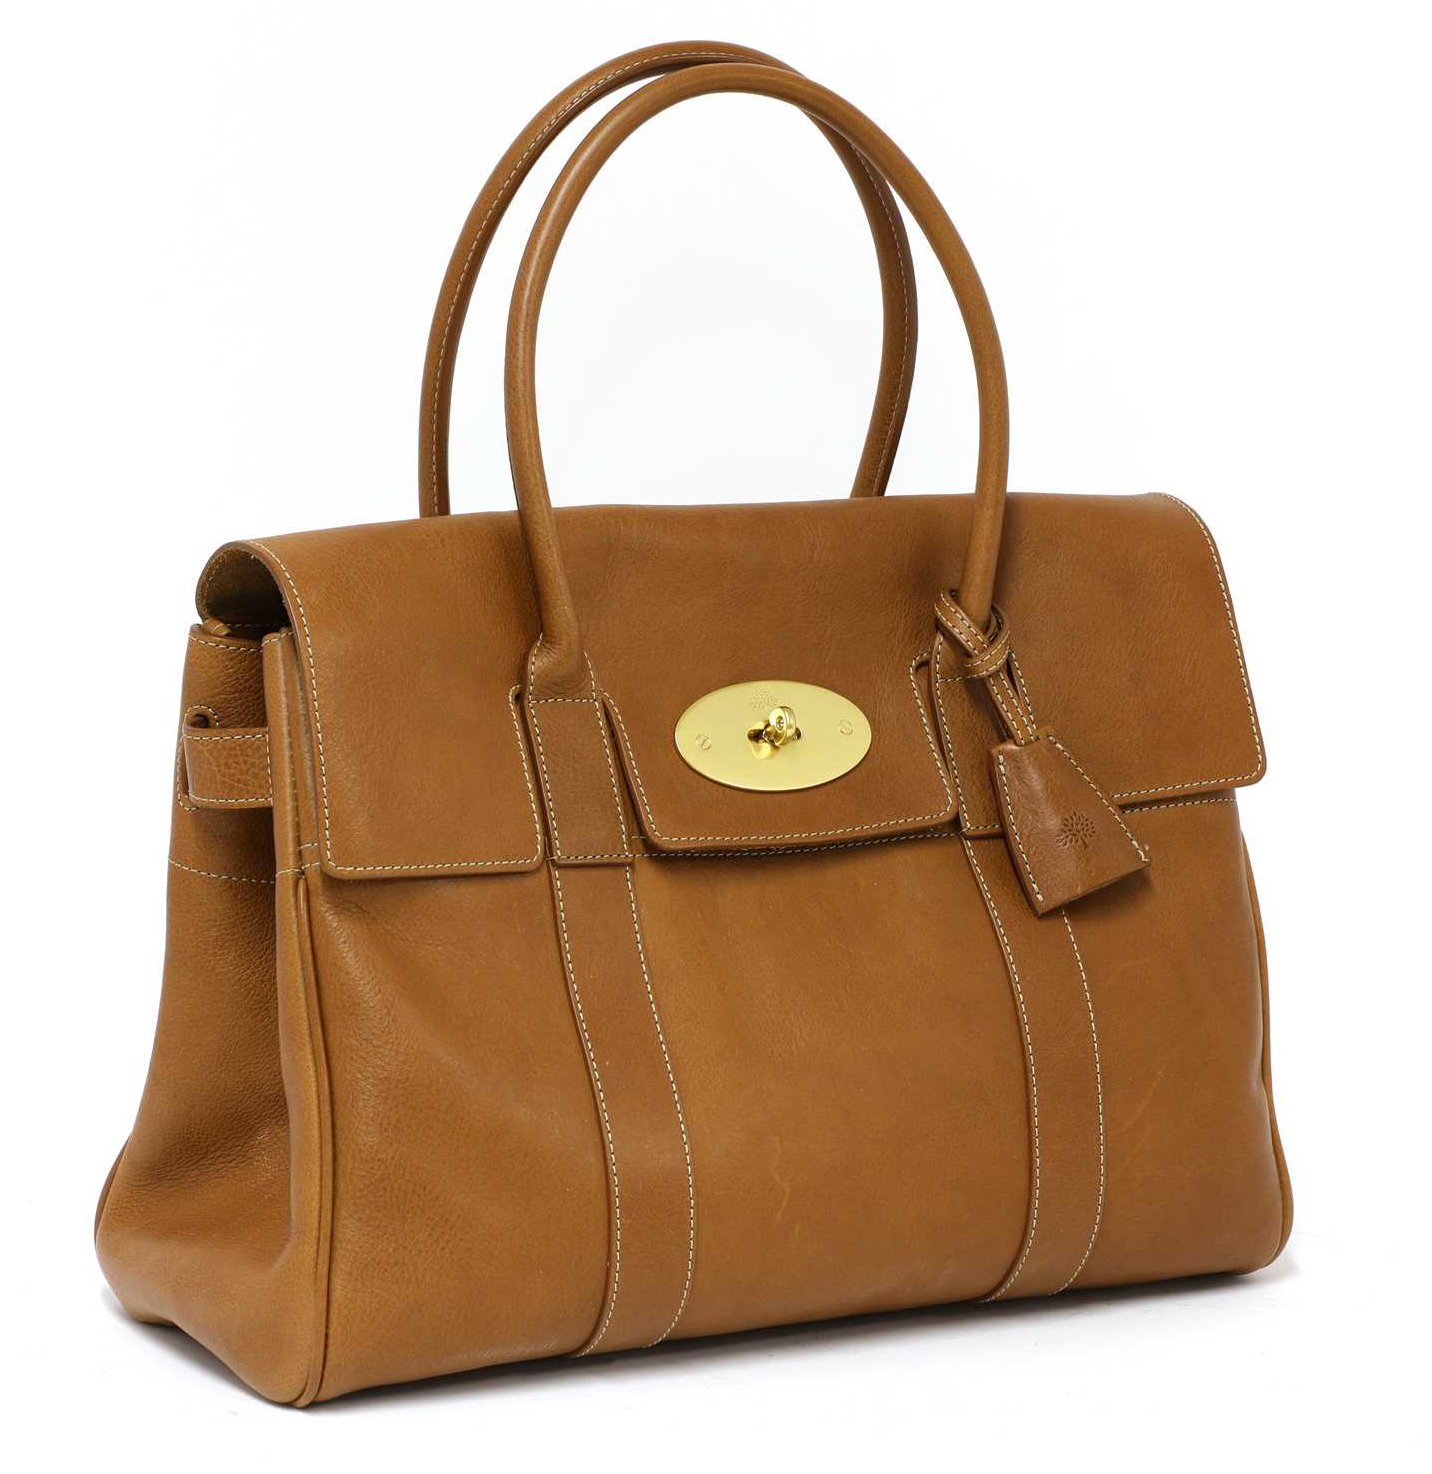 Mulberry Bayswater Handbag Sold For £380